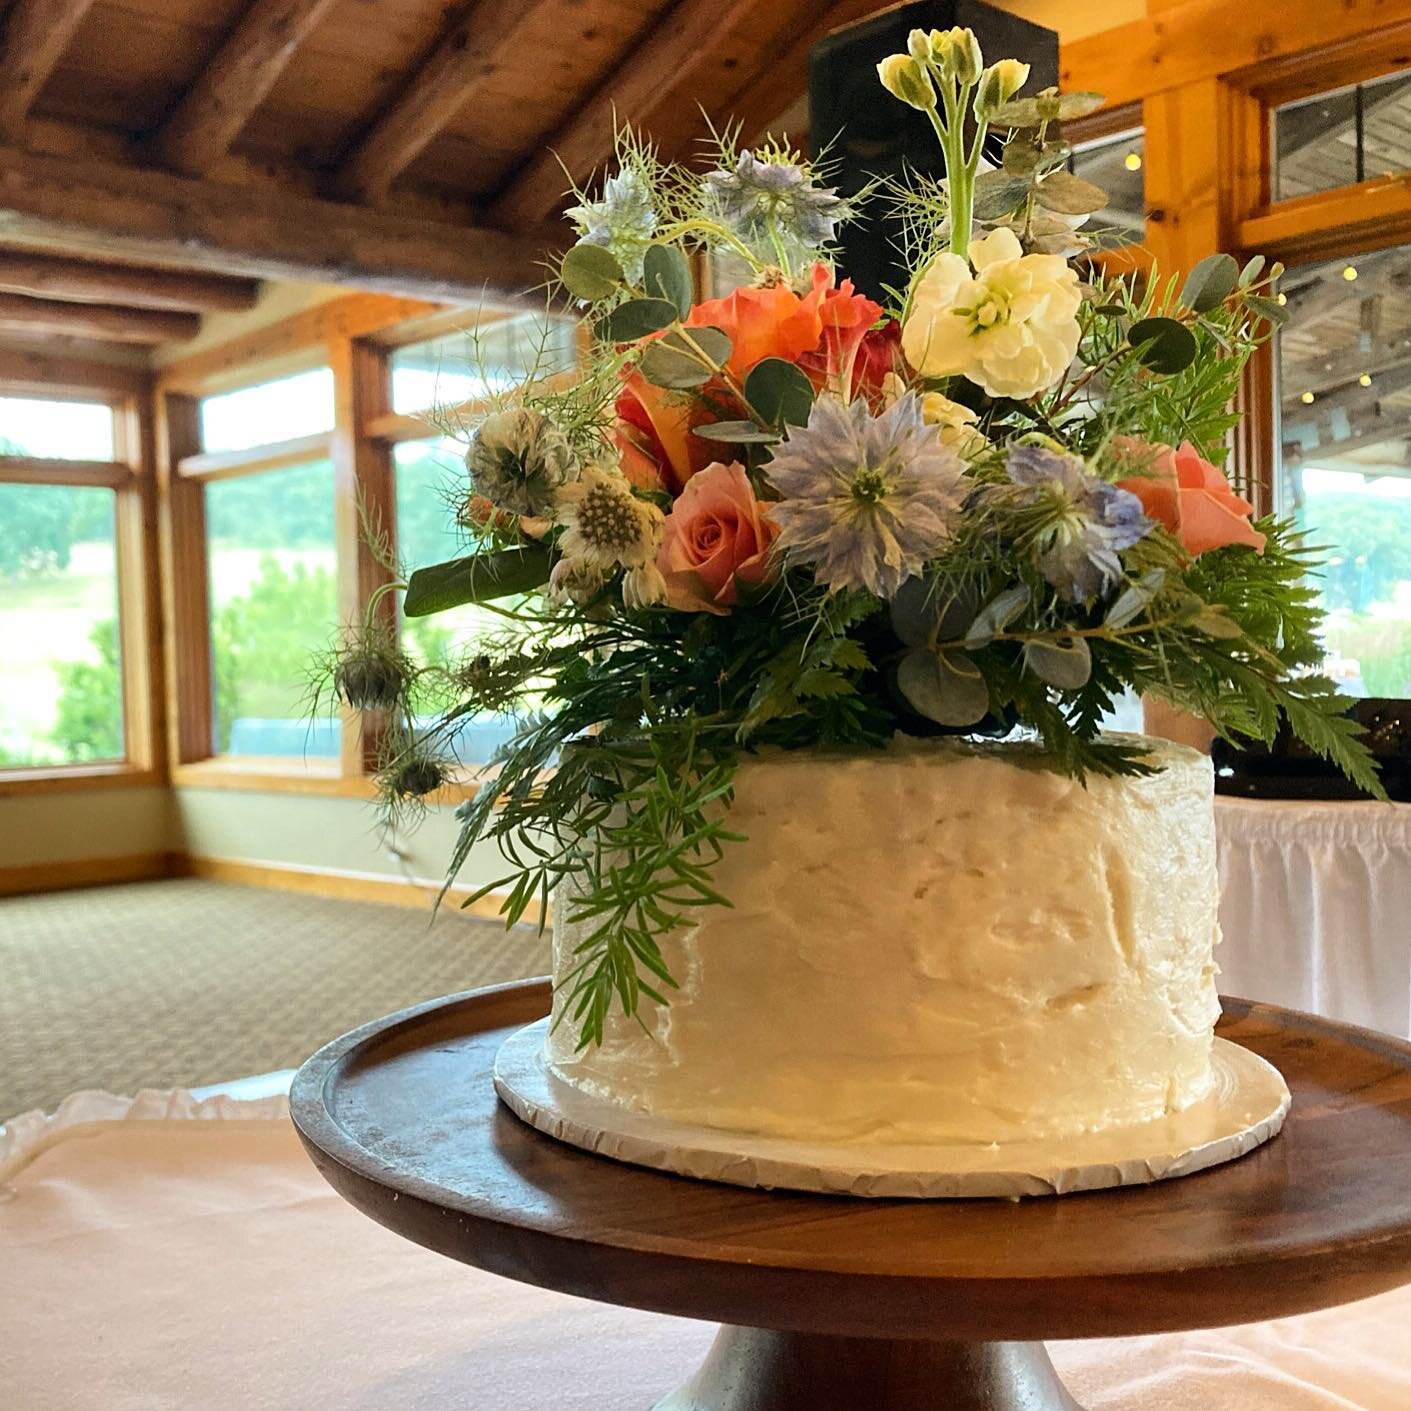 Sometimes you just need lots of flowers and a little cake.

Venue @hawksviewgolfclub 
Baker @gooseberriescatering